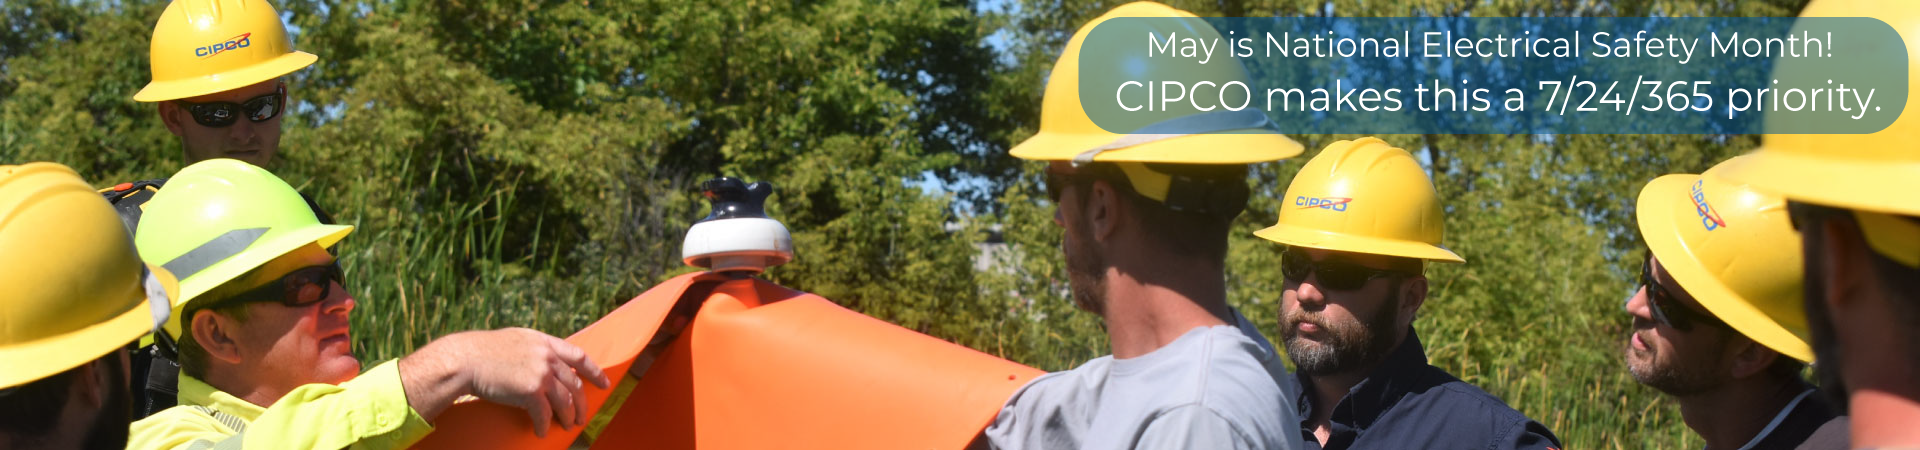 May is electrical safety month - a CIPCO priority